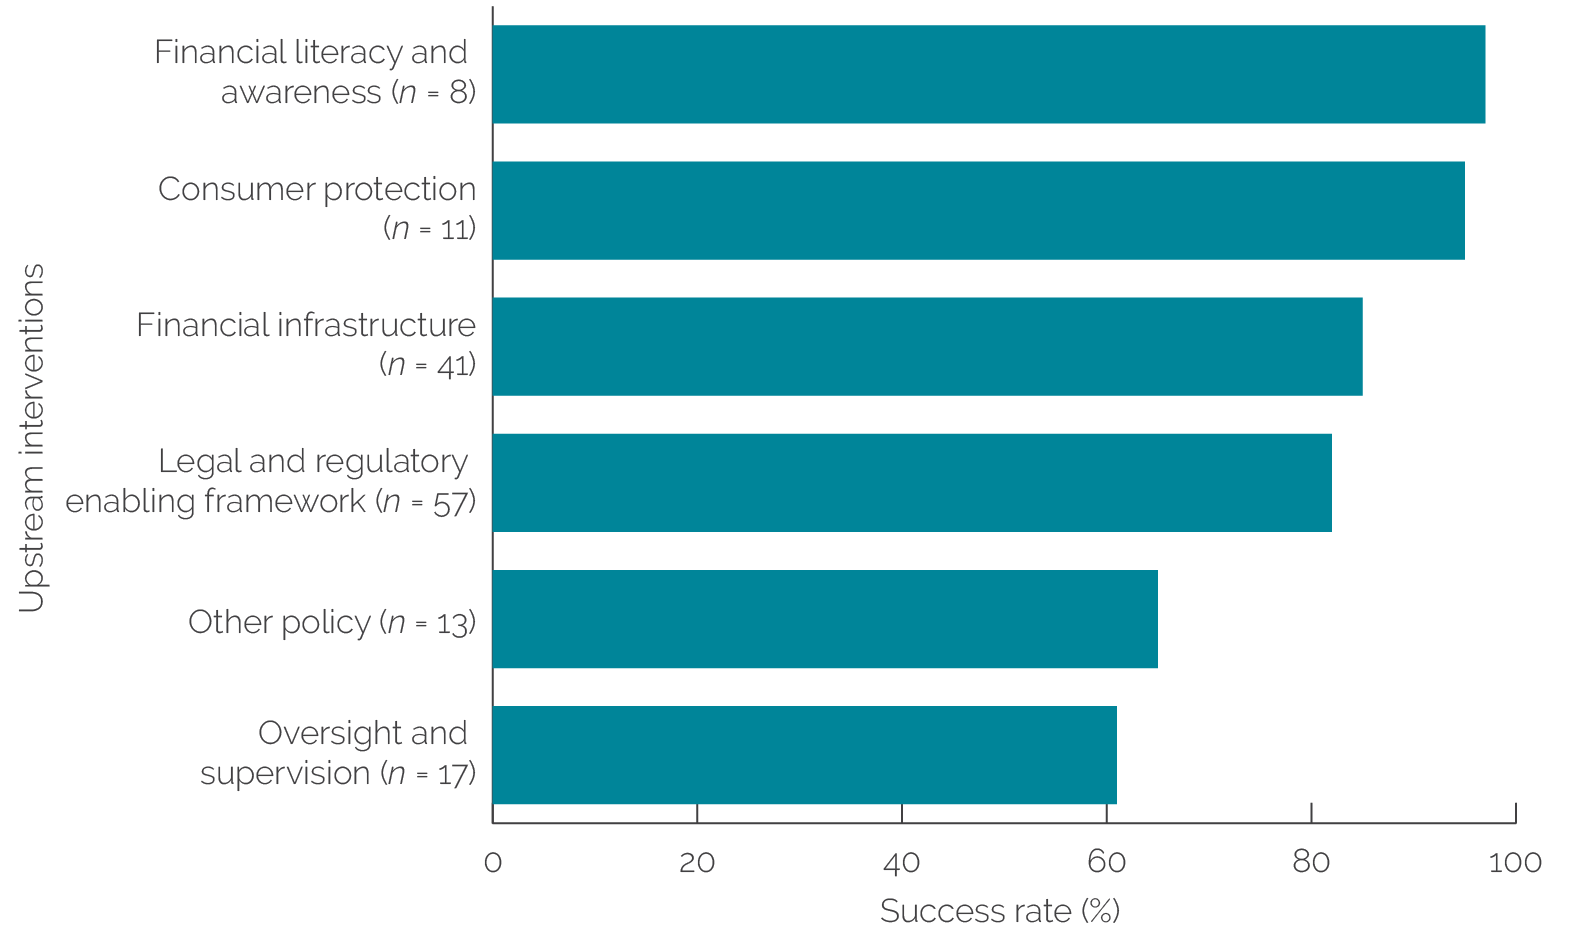 A bar chart shows the project success rate of upstream interventions by objectives, with a somewhat higher success rate associated with financial literacy and consumer protection.